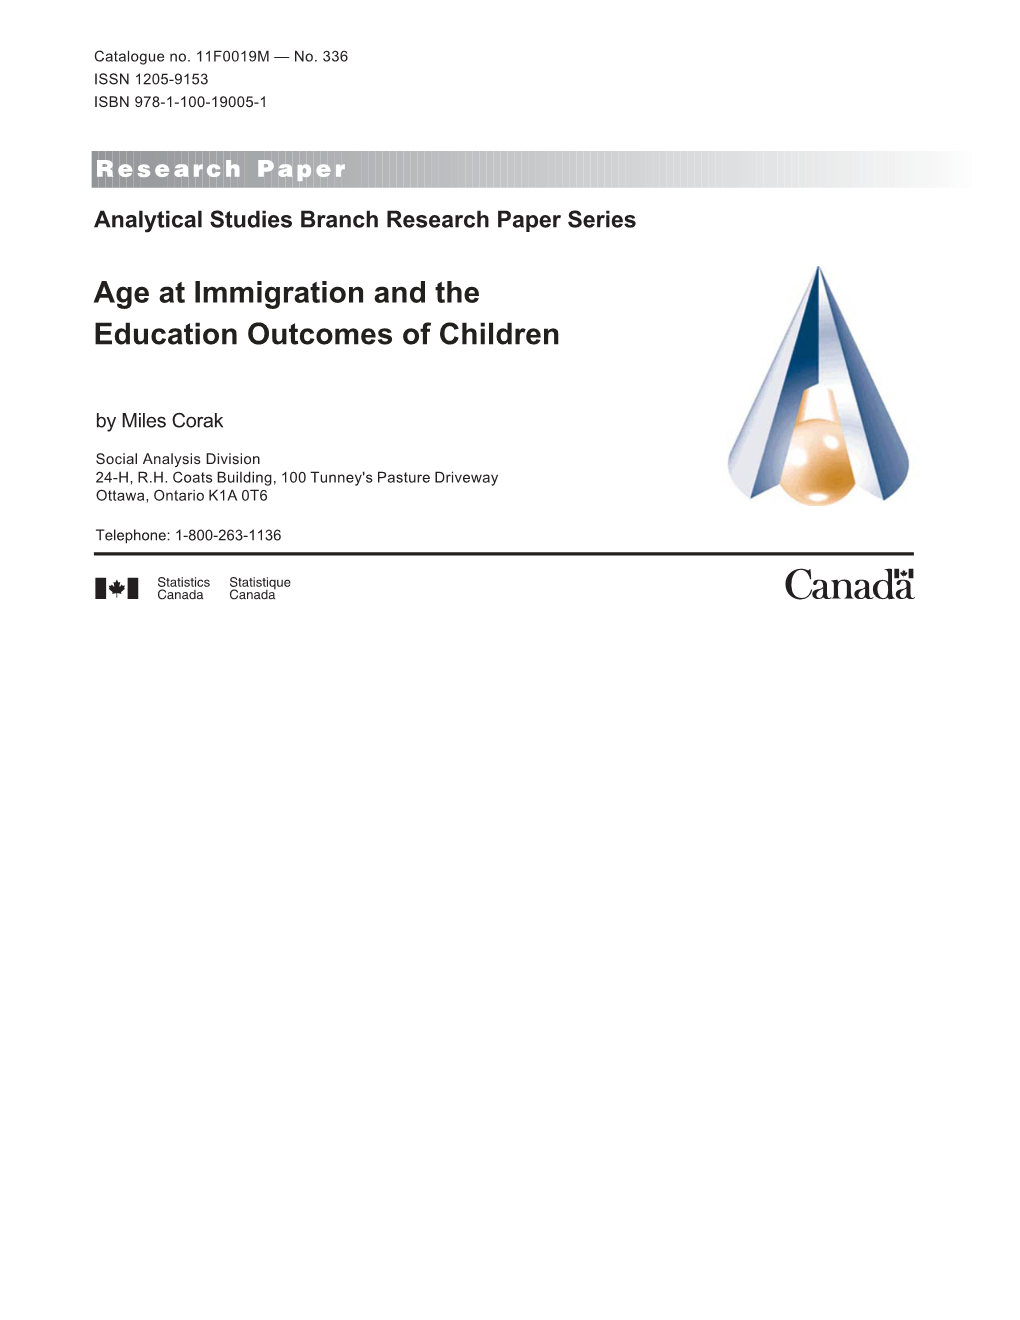 Age at Immigration and the Education Outcomes of Children by Miles Corak